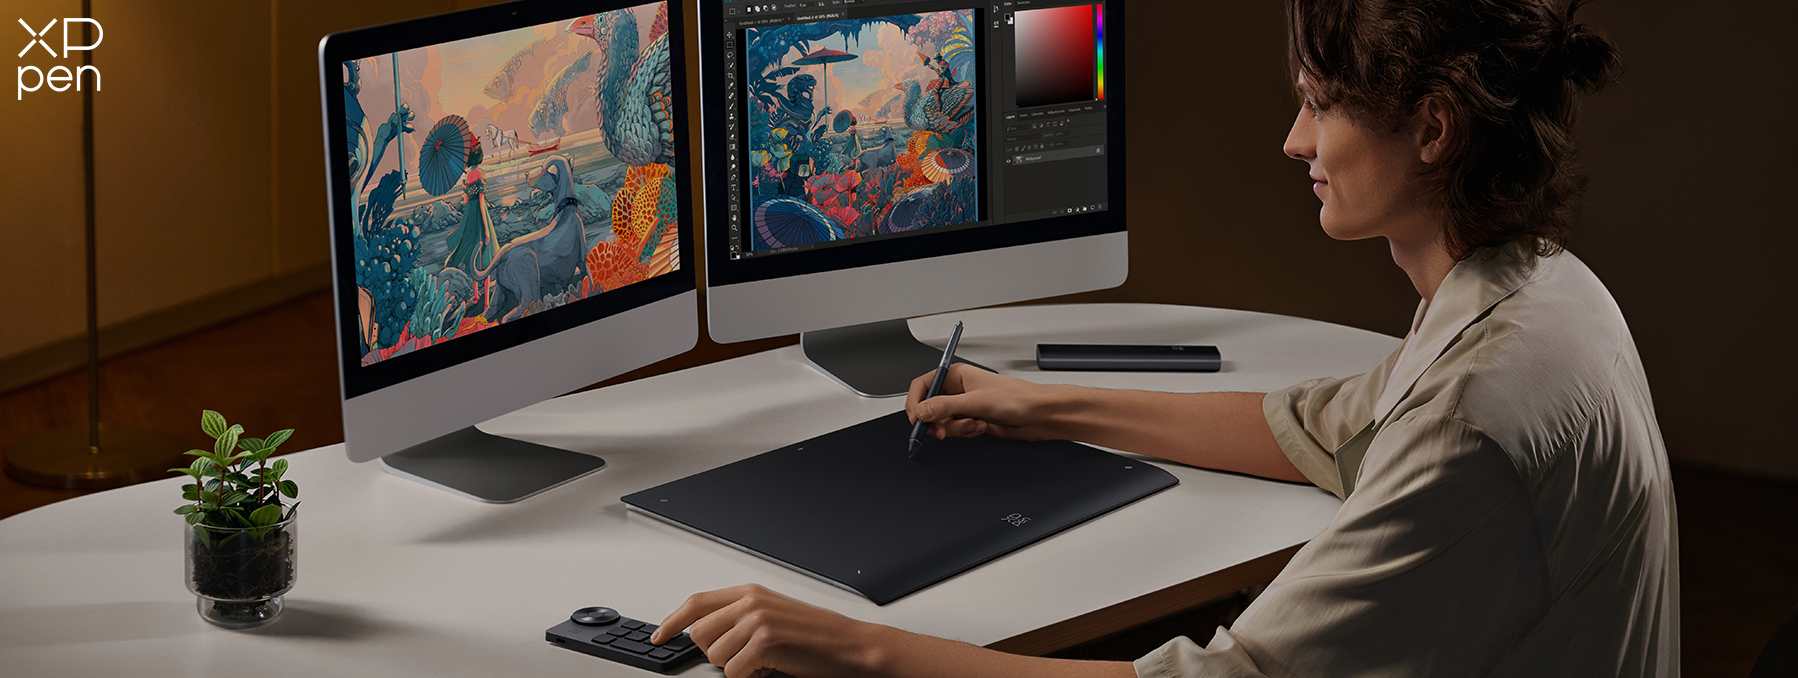 Best Drawing Tablets for Adobe Photoshop and Graphic Design